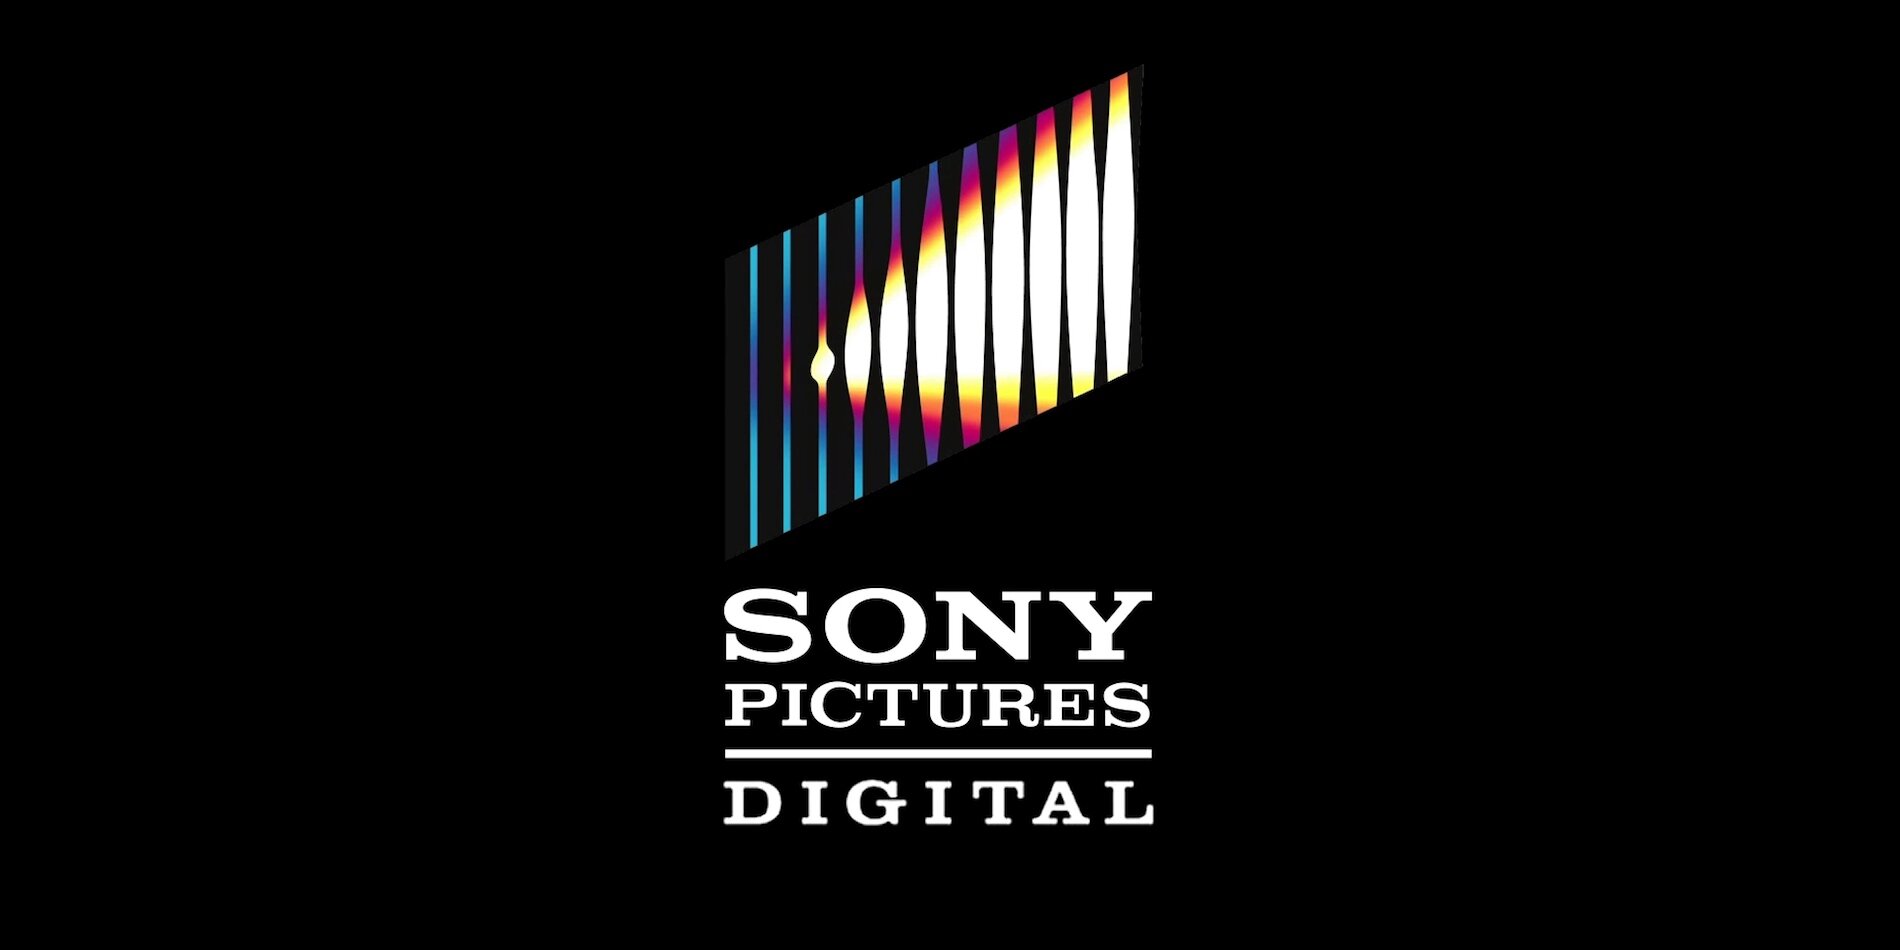 Sony-Pictures.jpg